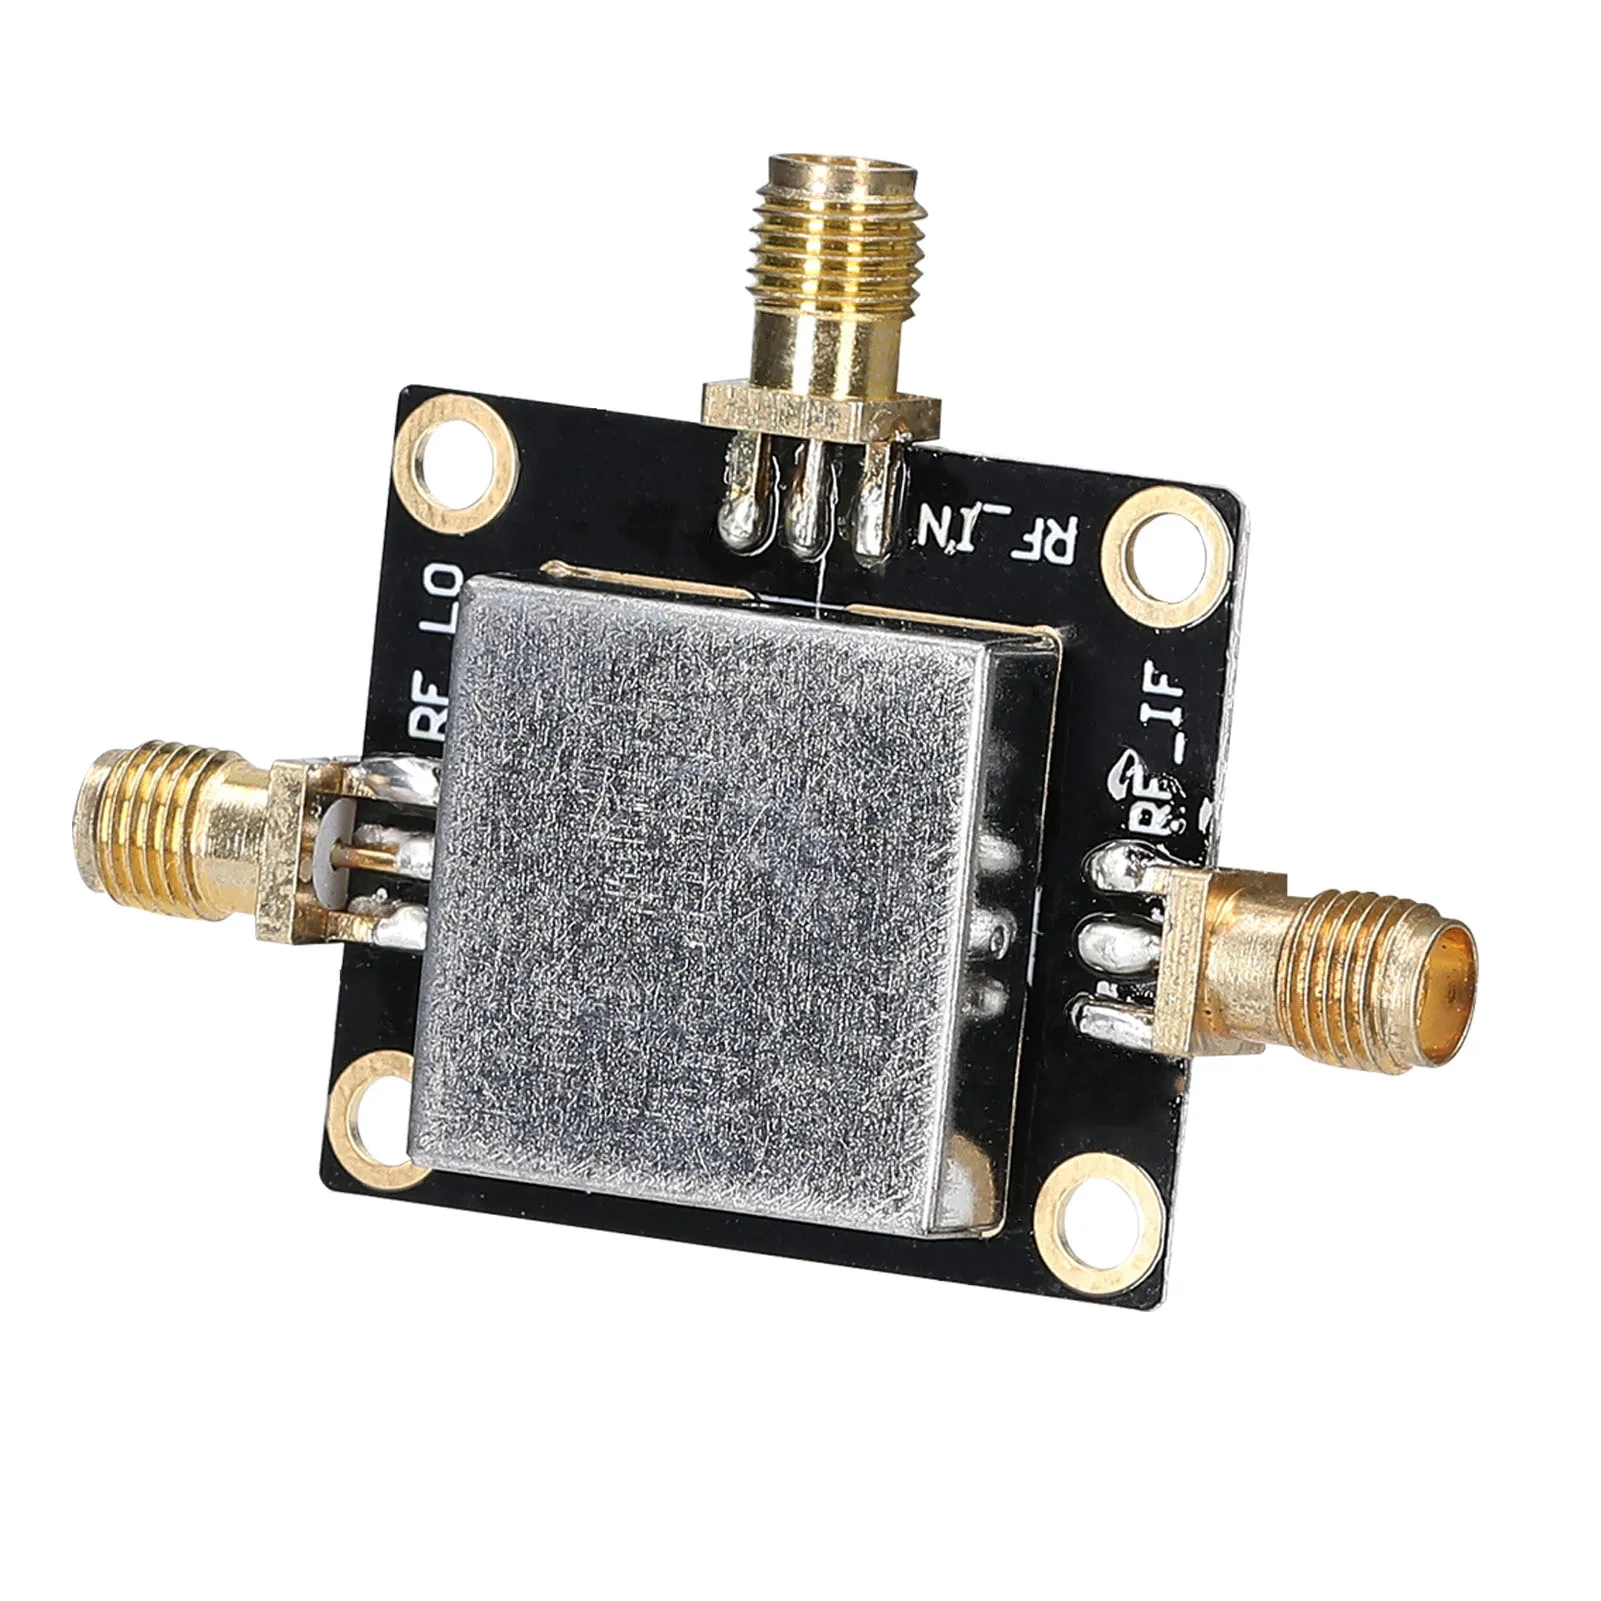 

ADE-1 Passive Radio Frequency Mixer 0.5M-0.5GHz High Linear Low Noise Signal Mixers with SMA Input Output Interface